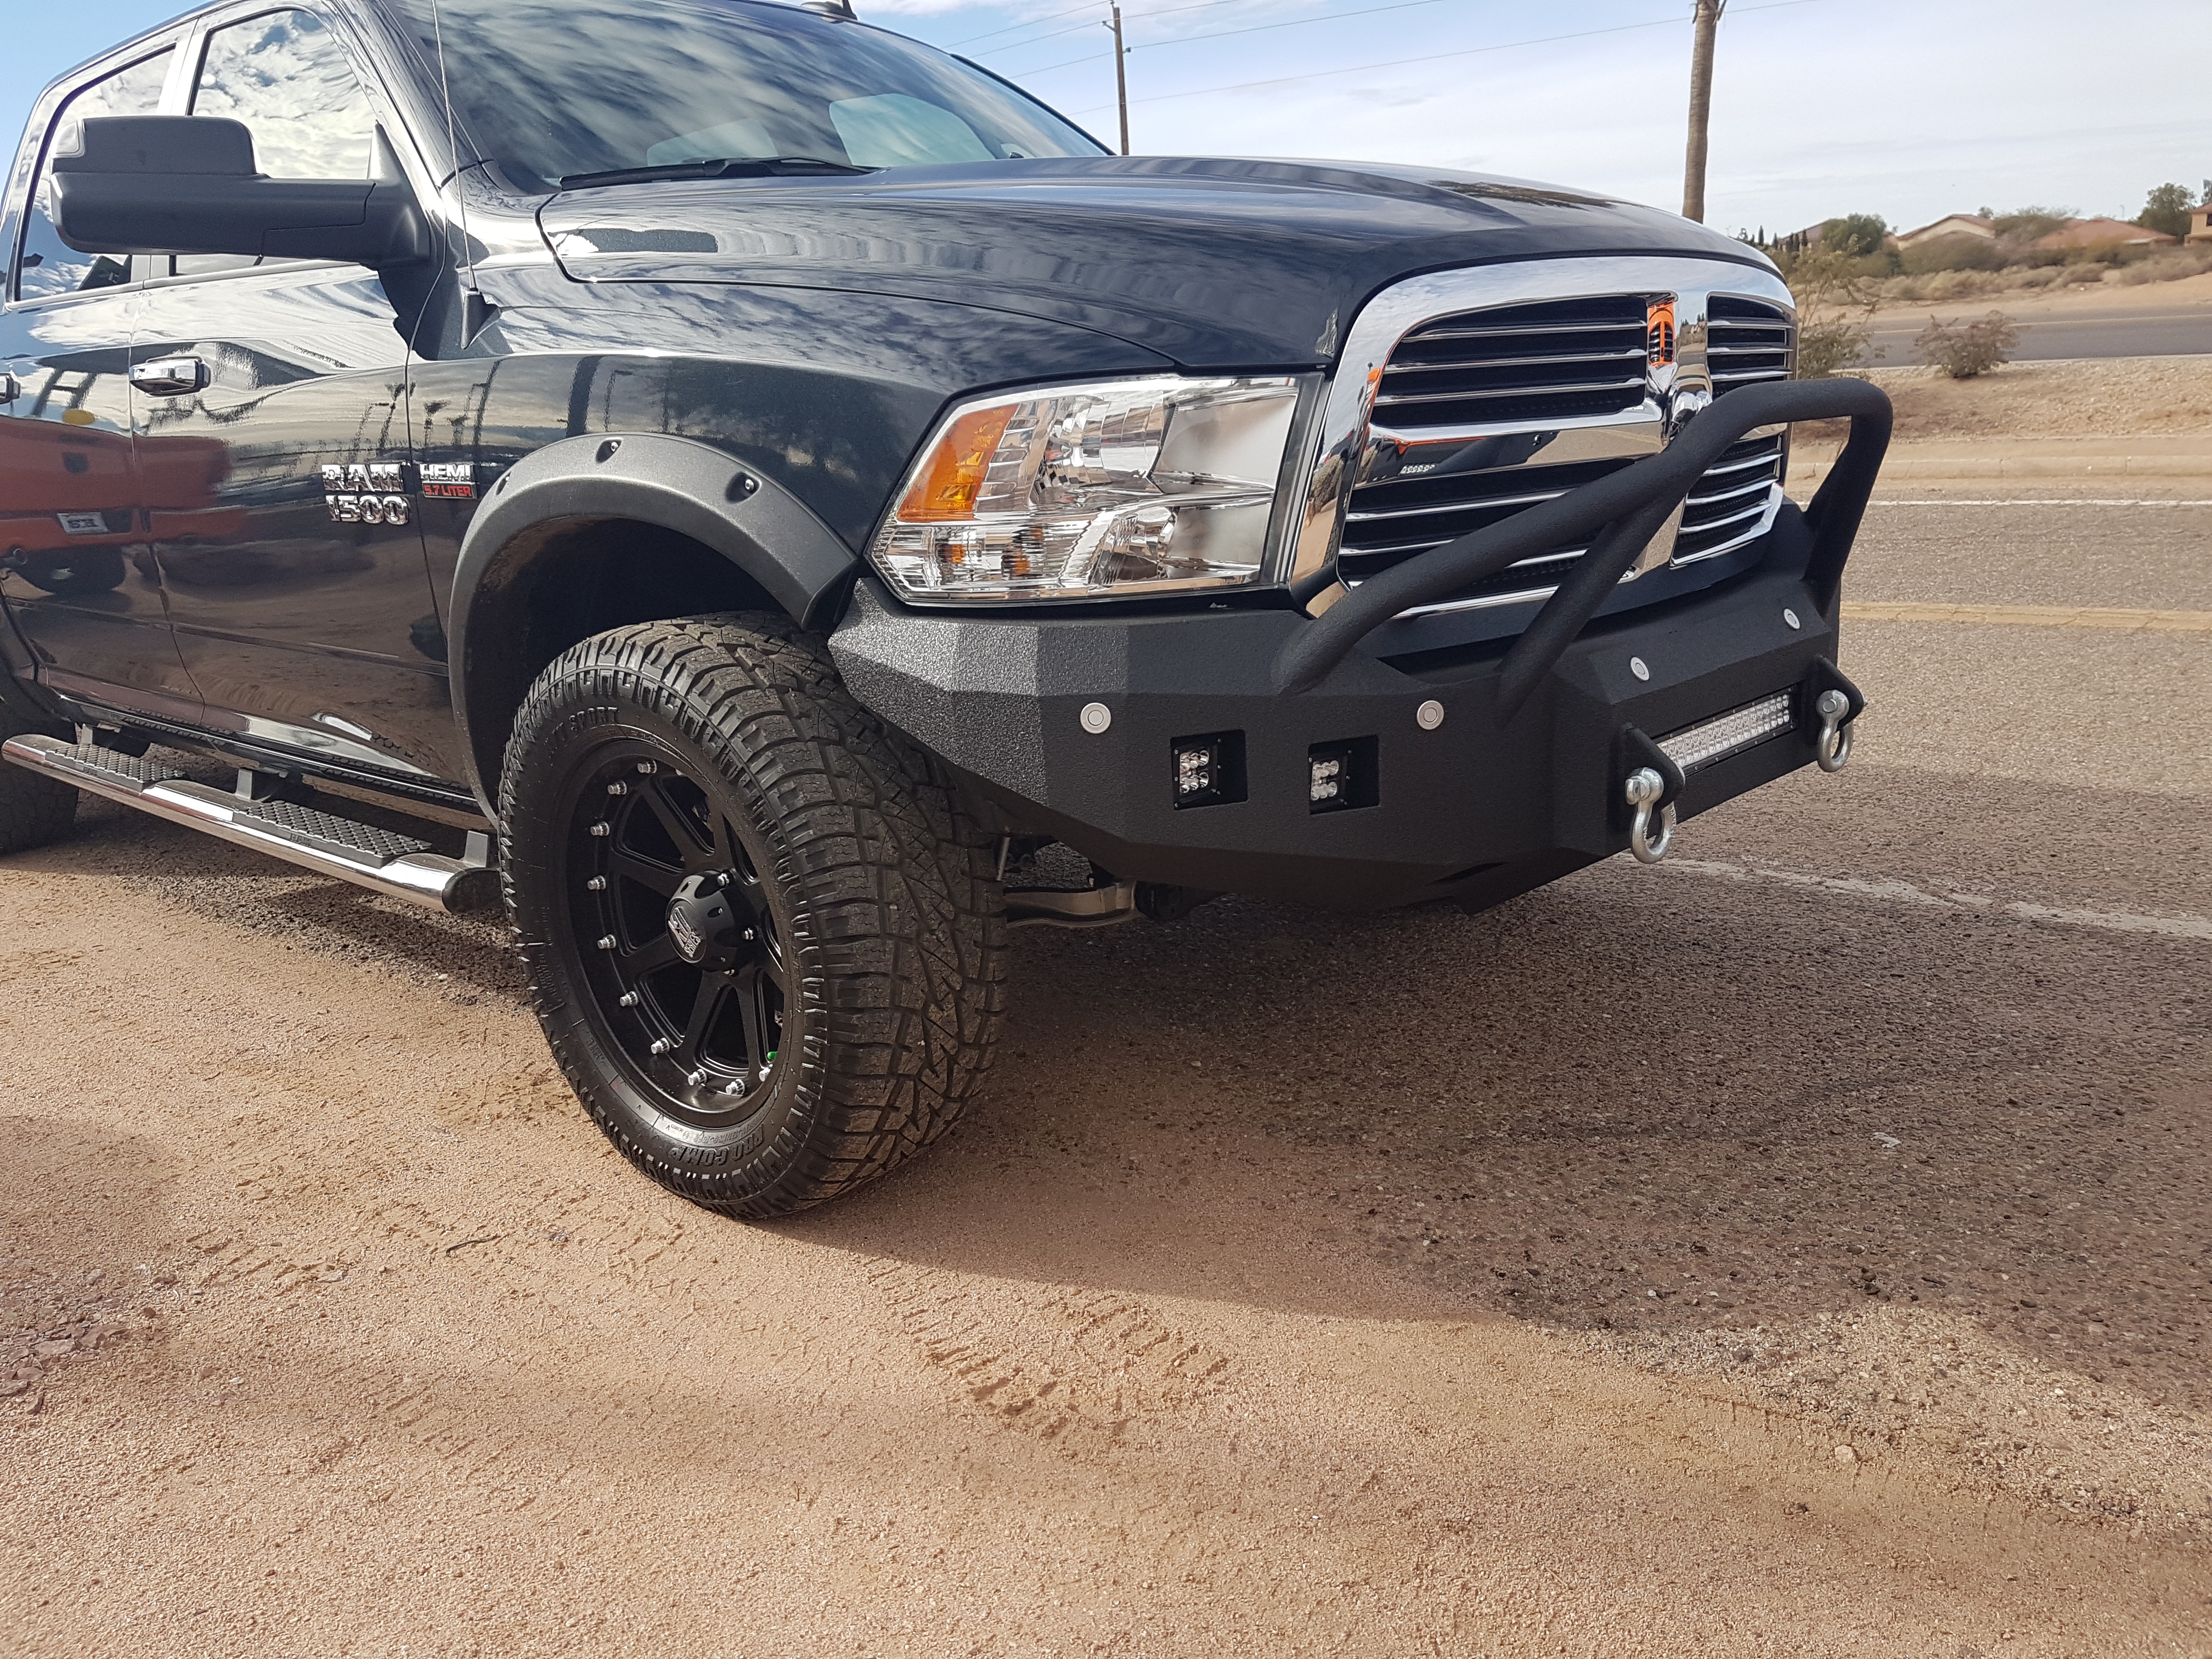 13-21 Dodge 1500 Delta 4 with light bar plate and square lights